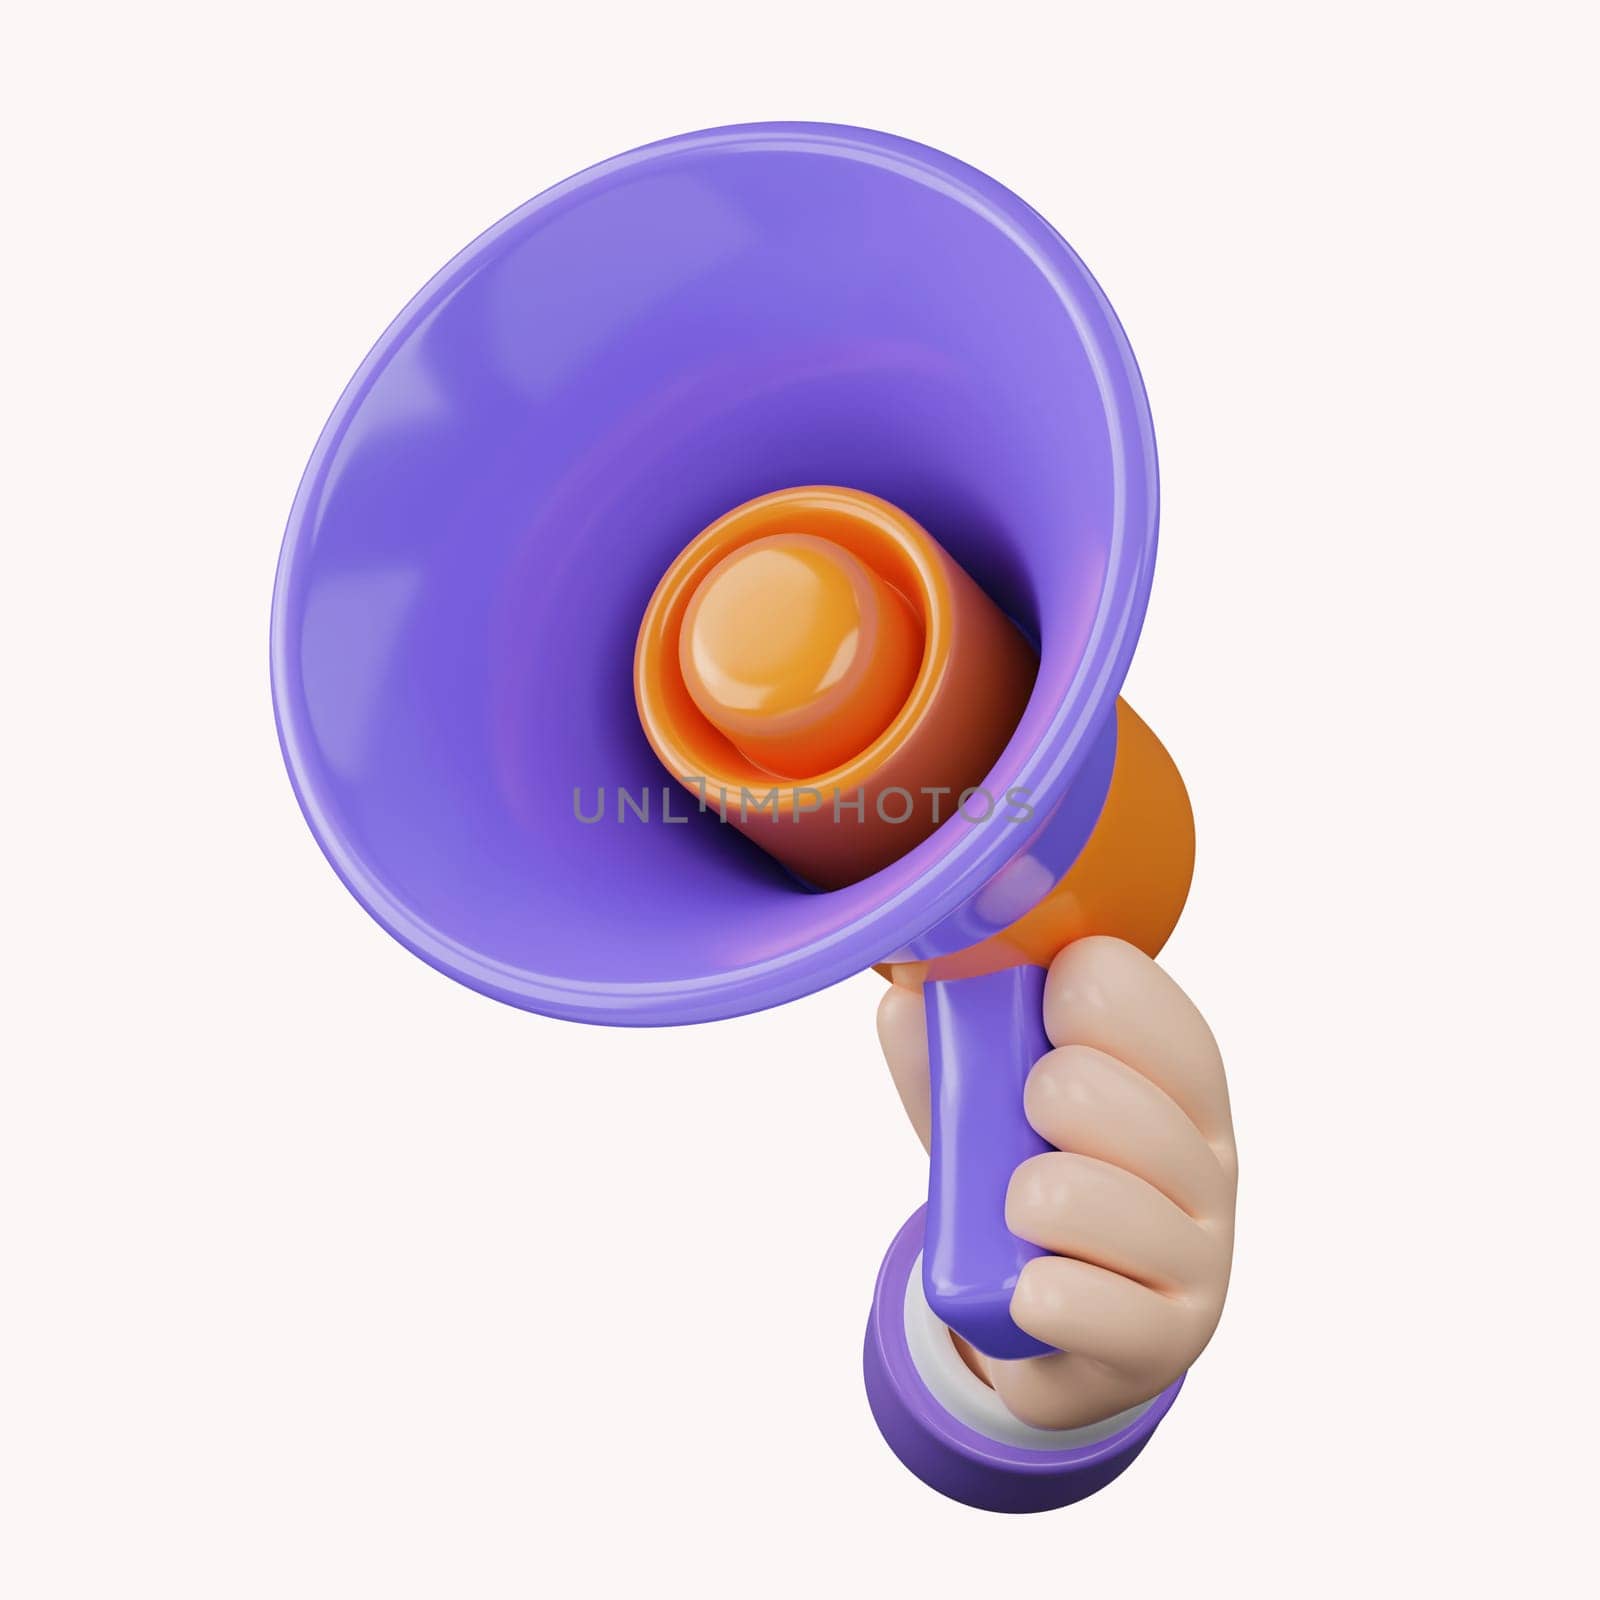 Cartoon hand holding megaphone 3d render on white isolated background. Digital Marketing concept..